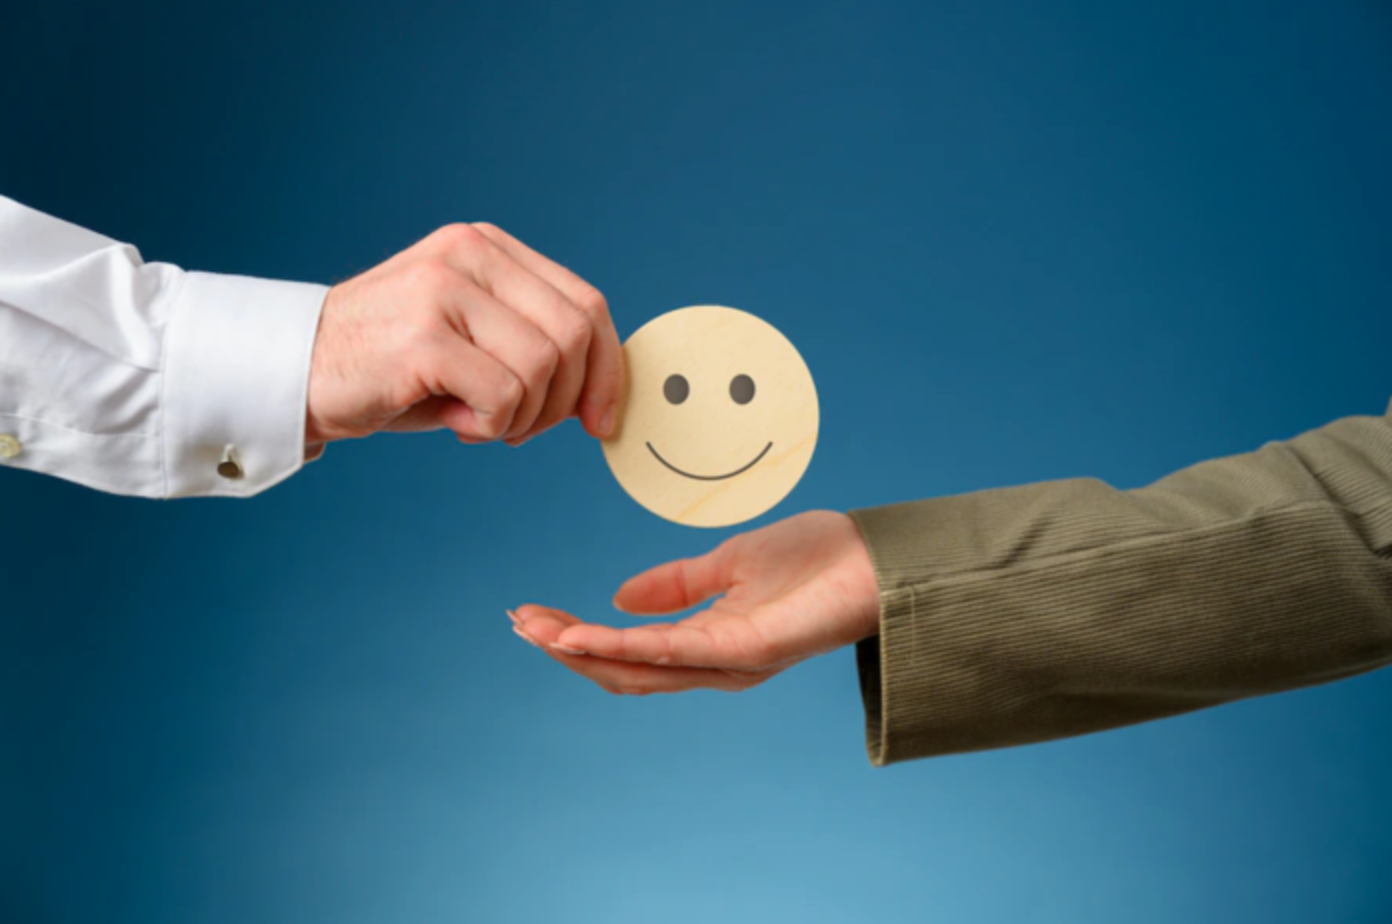 7 Customer Retention Metrics That Allows You To Measure Customer Loyalty
